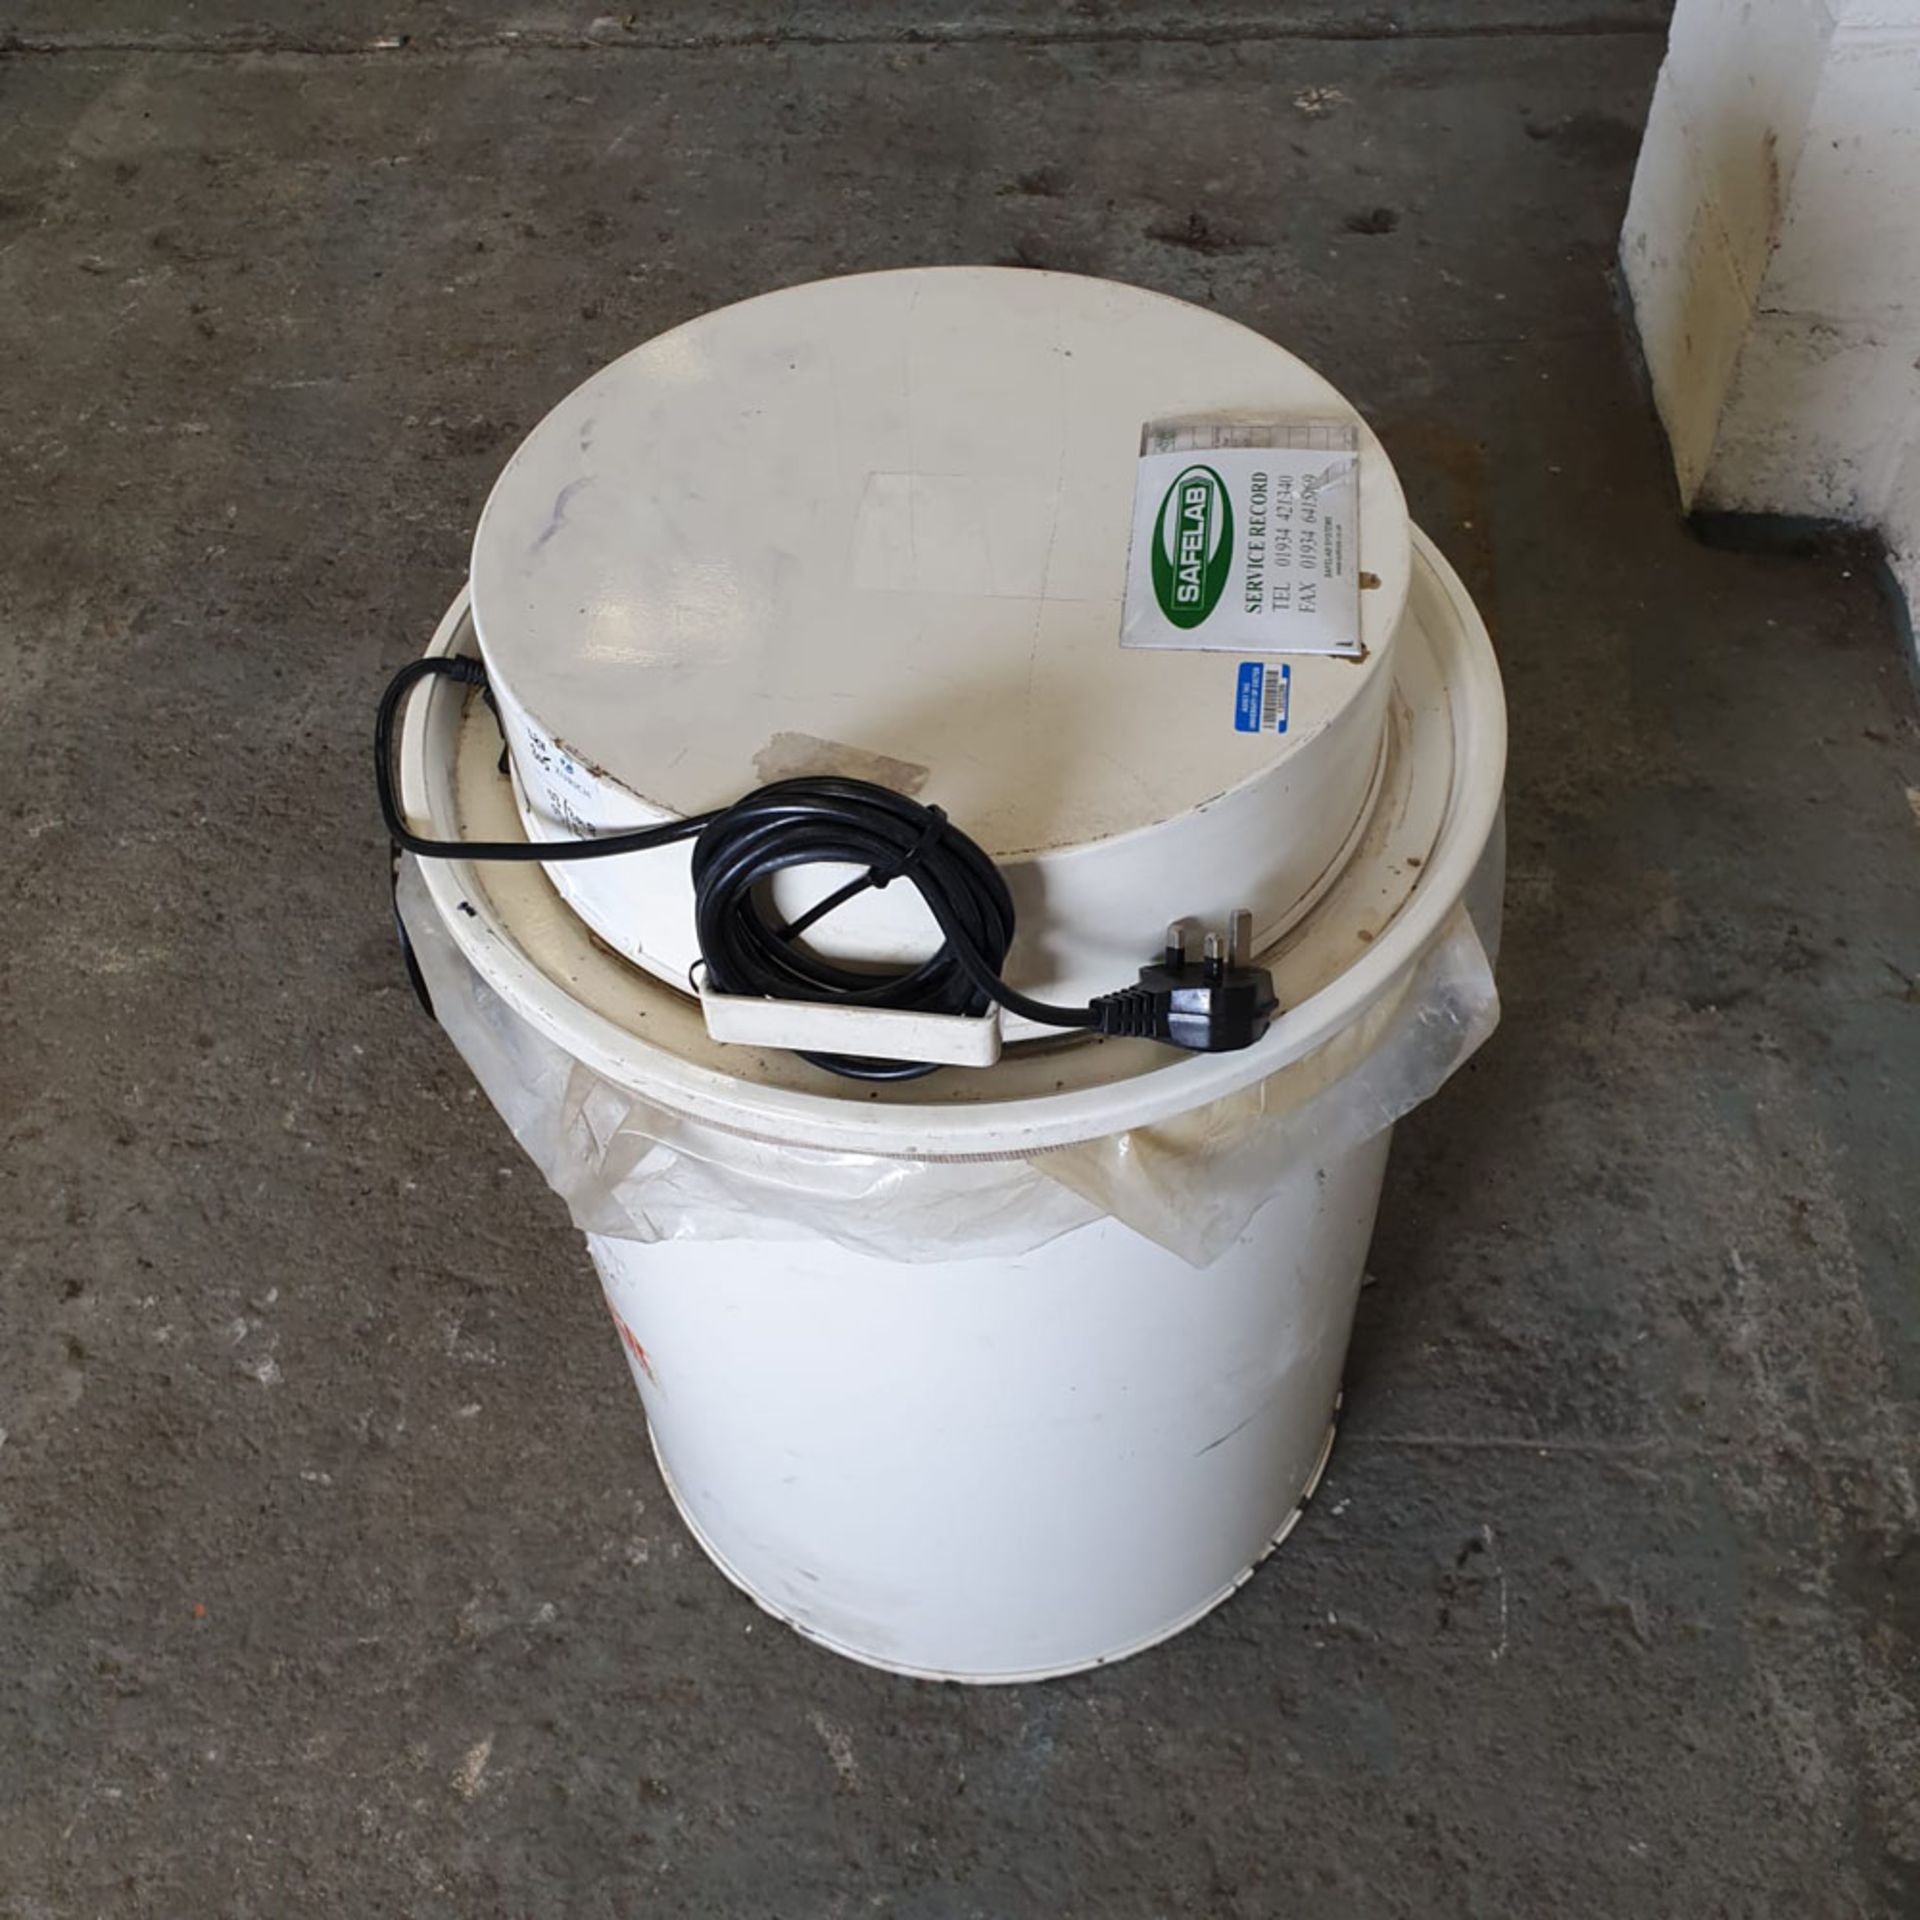 Axminster WV2 Dust Extractor. 240V. Max Power 2000W. - Image 2 of 5